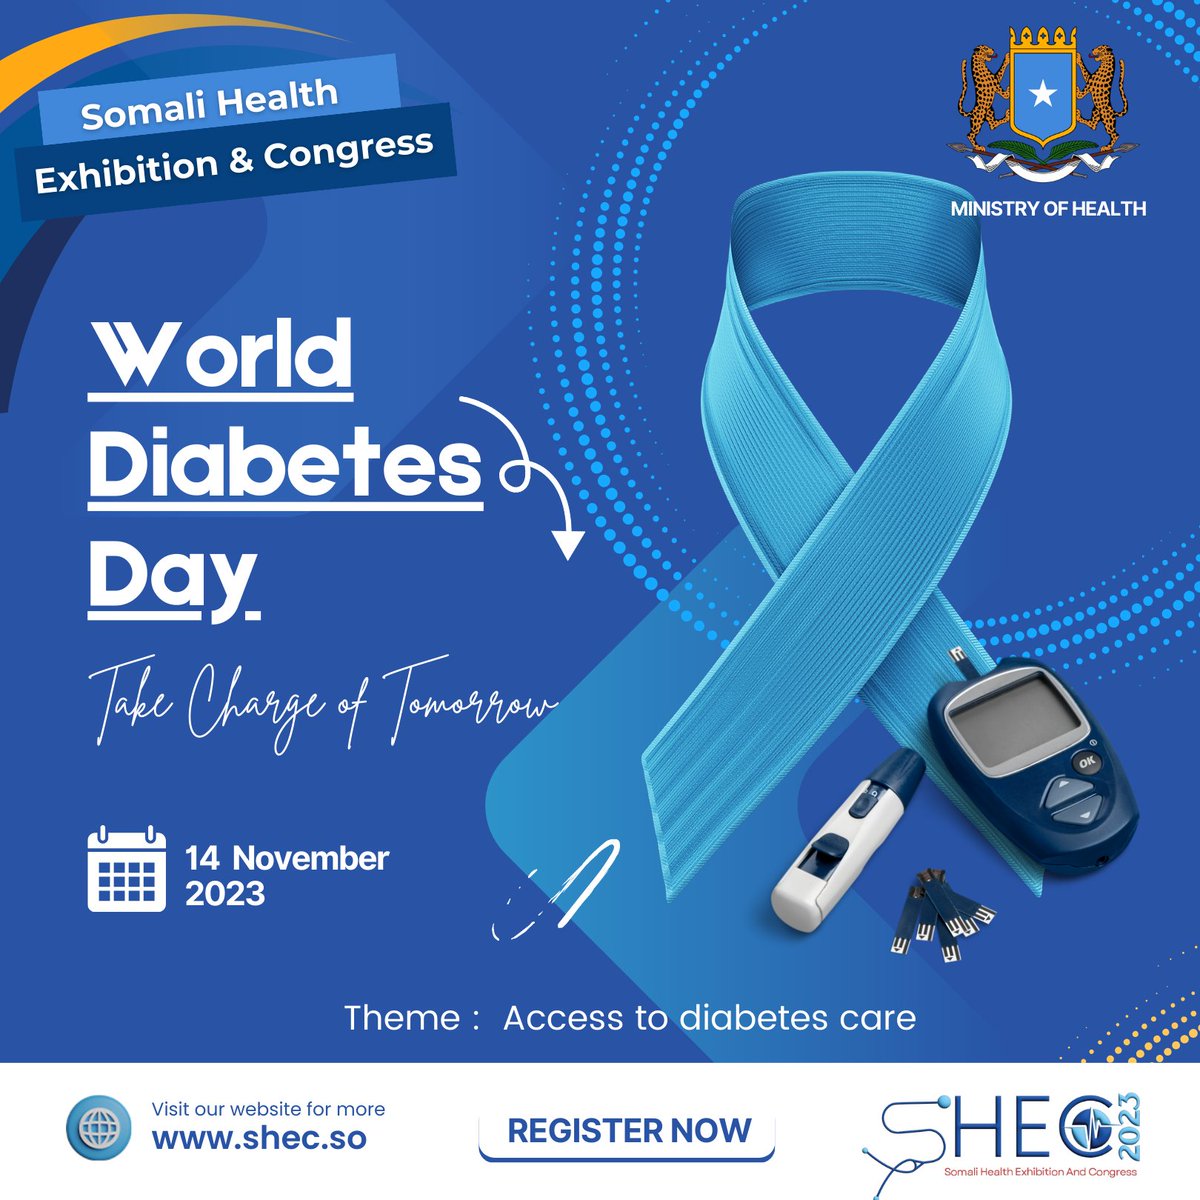 Together in the fight against diabetes: A little knowledge goes a long way. Empower yourself and others with diabetes education. 🎗️ 

#DefeatDiabetes #AwarenessIsPower #Diabetesawareness #SHEC2023 #SomaliHealthExhibition #DiabetesAwareness